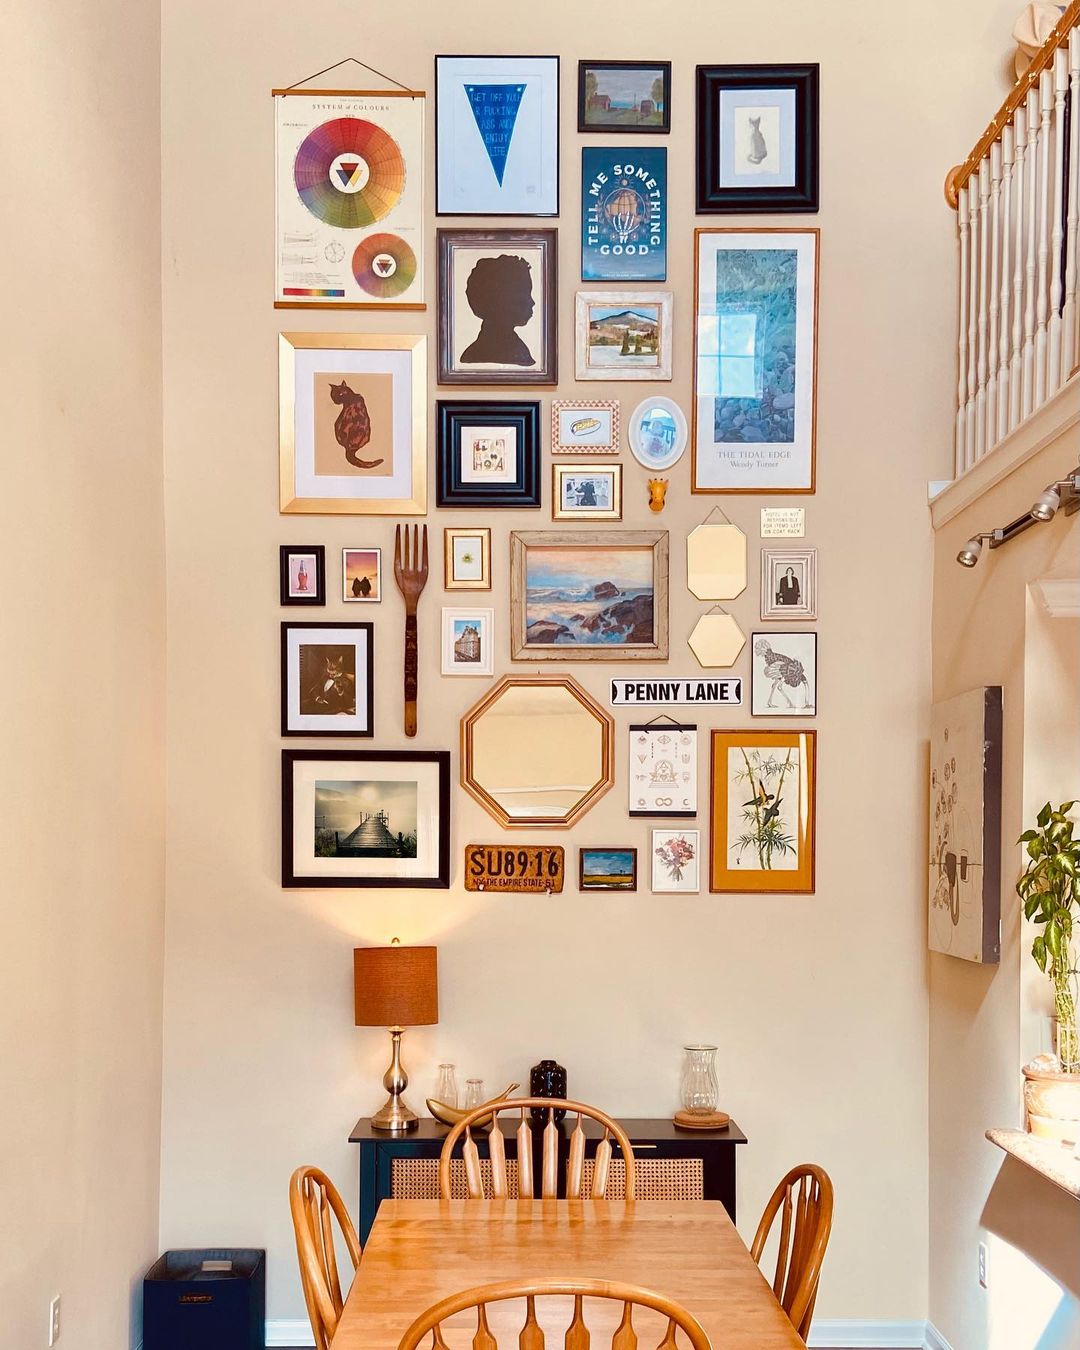  Eclectic Gallery Wall for Personal Expression